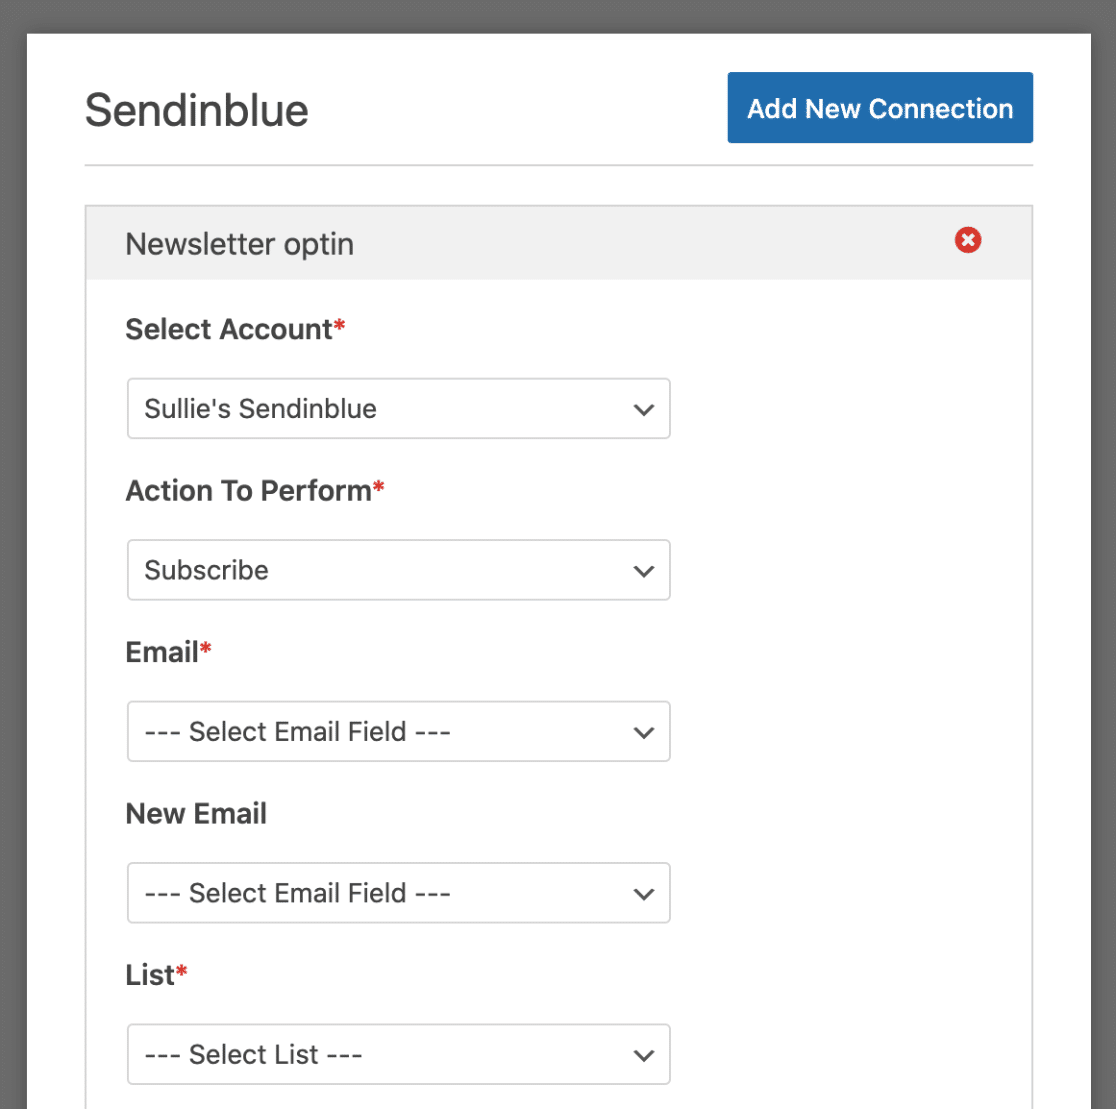 Mapping Sendinblue And WPForms Fields